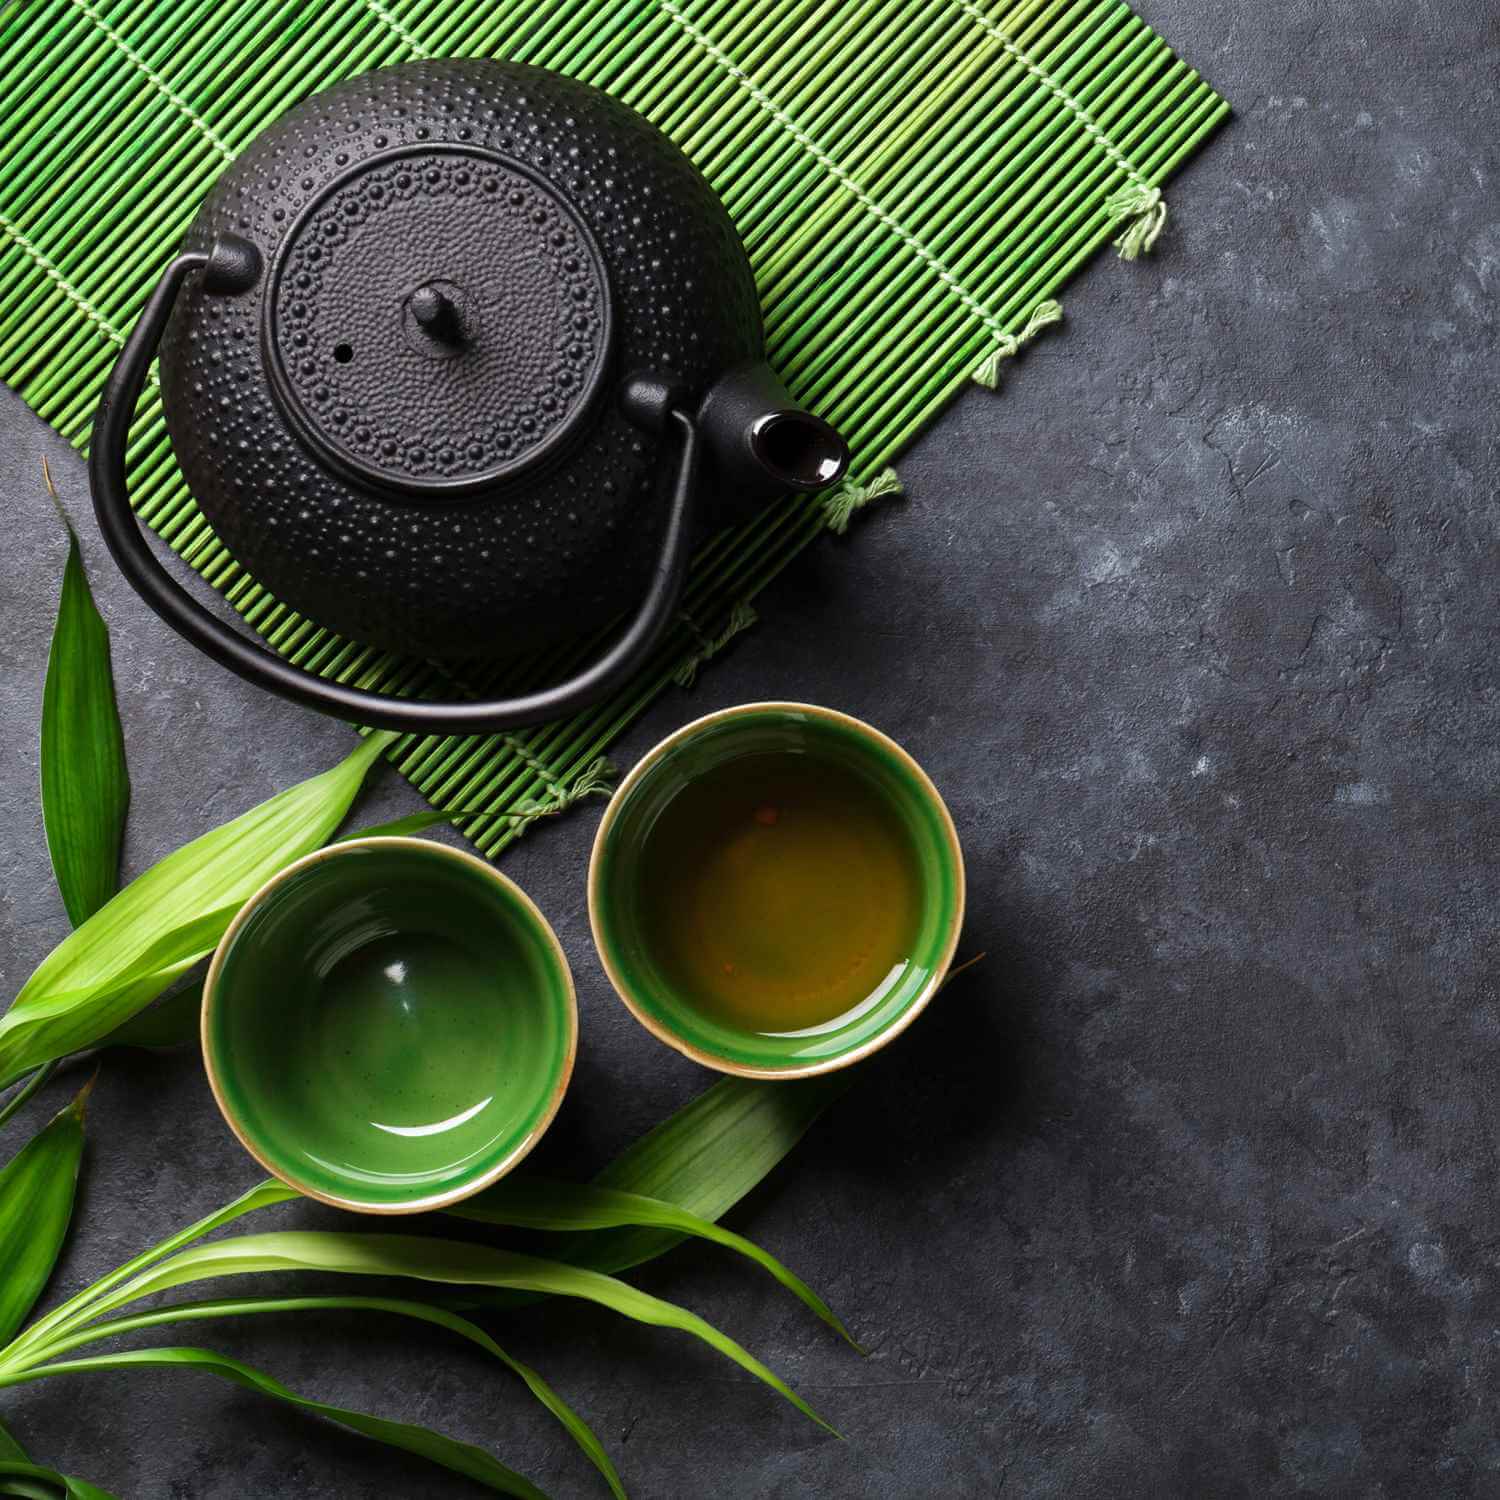 Bamboo is used in various ways in Japanese tea culture = Shutterstock